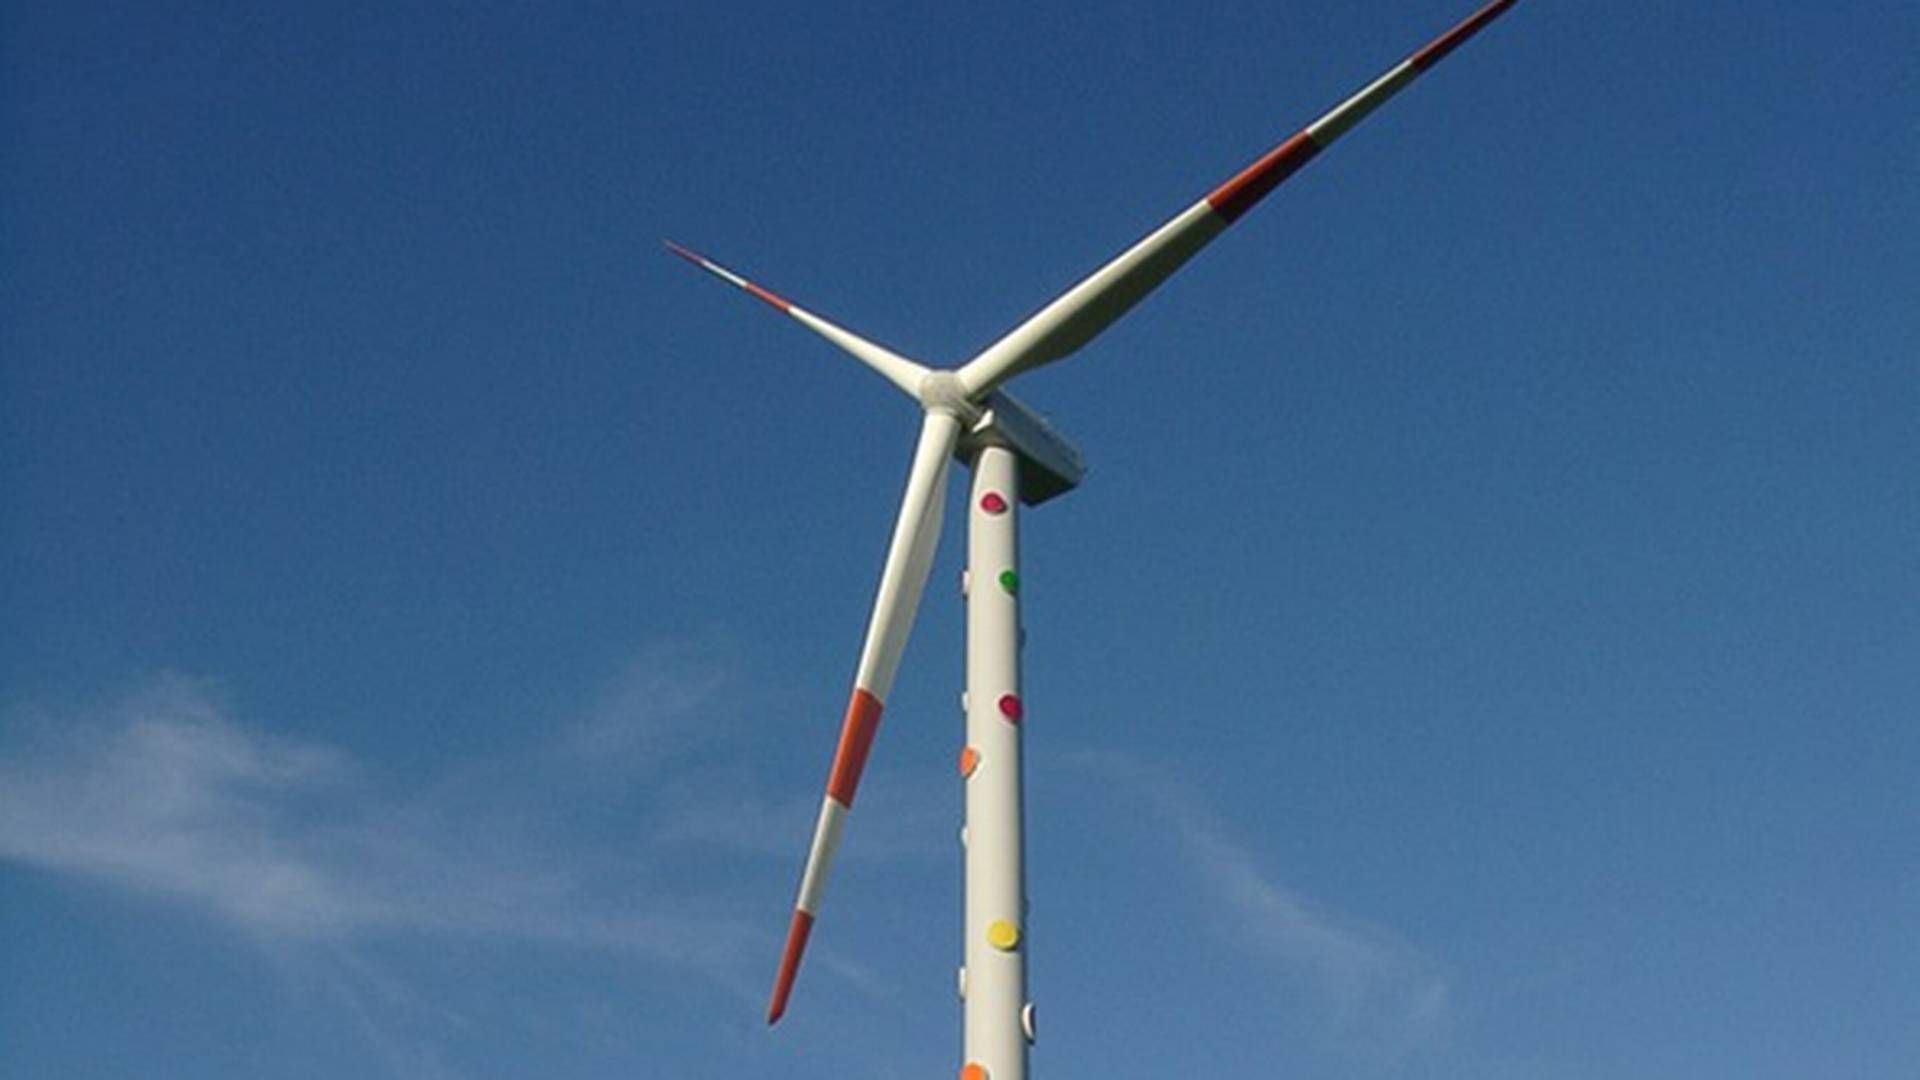 Selling subsidy-free wind energy is no big deal, says Statkraft, which just signed its first PPA on older German wind farms – including the installation Kunst und Wind. | Photo: Statkraft